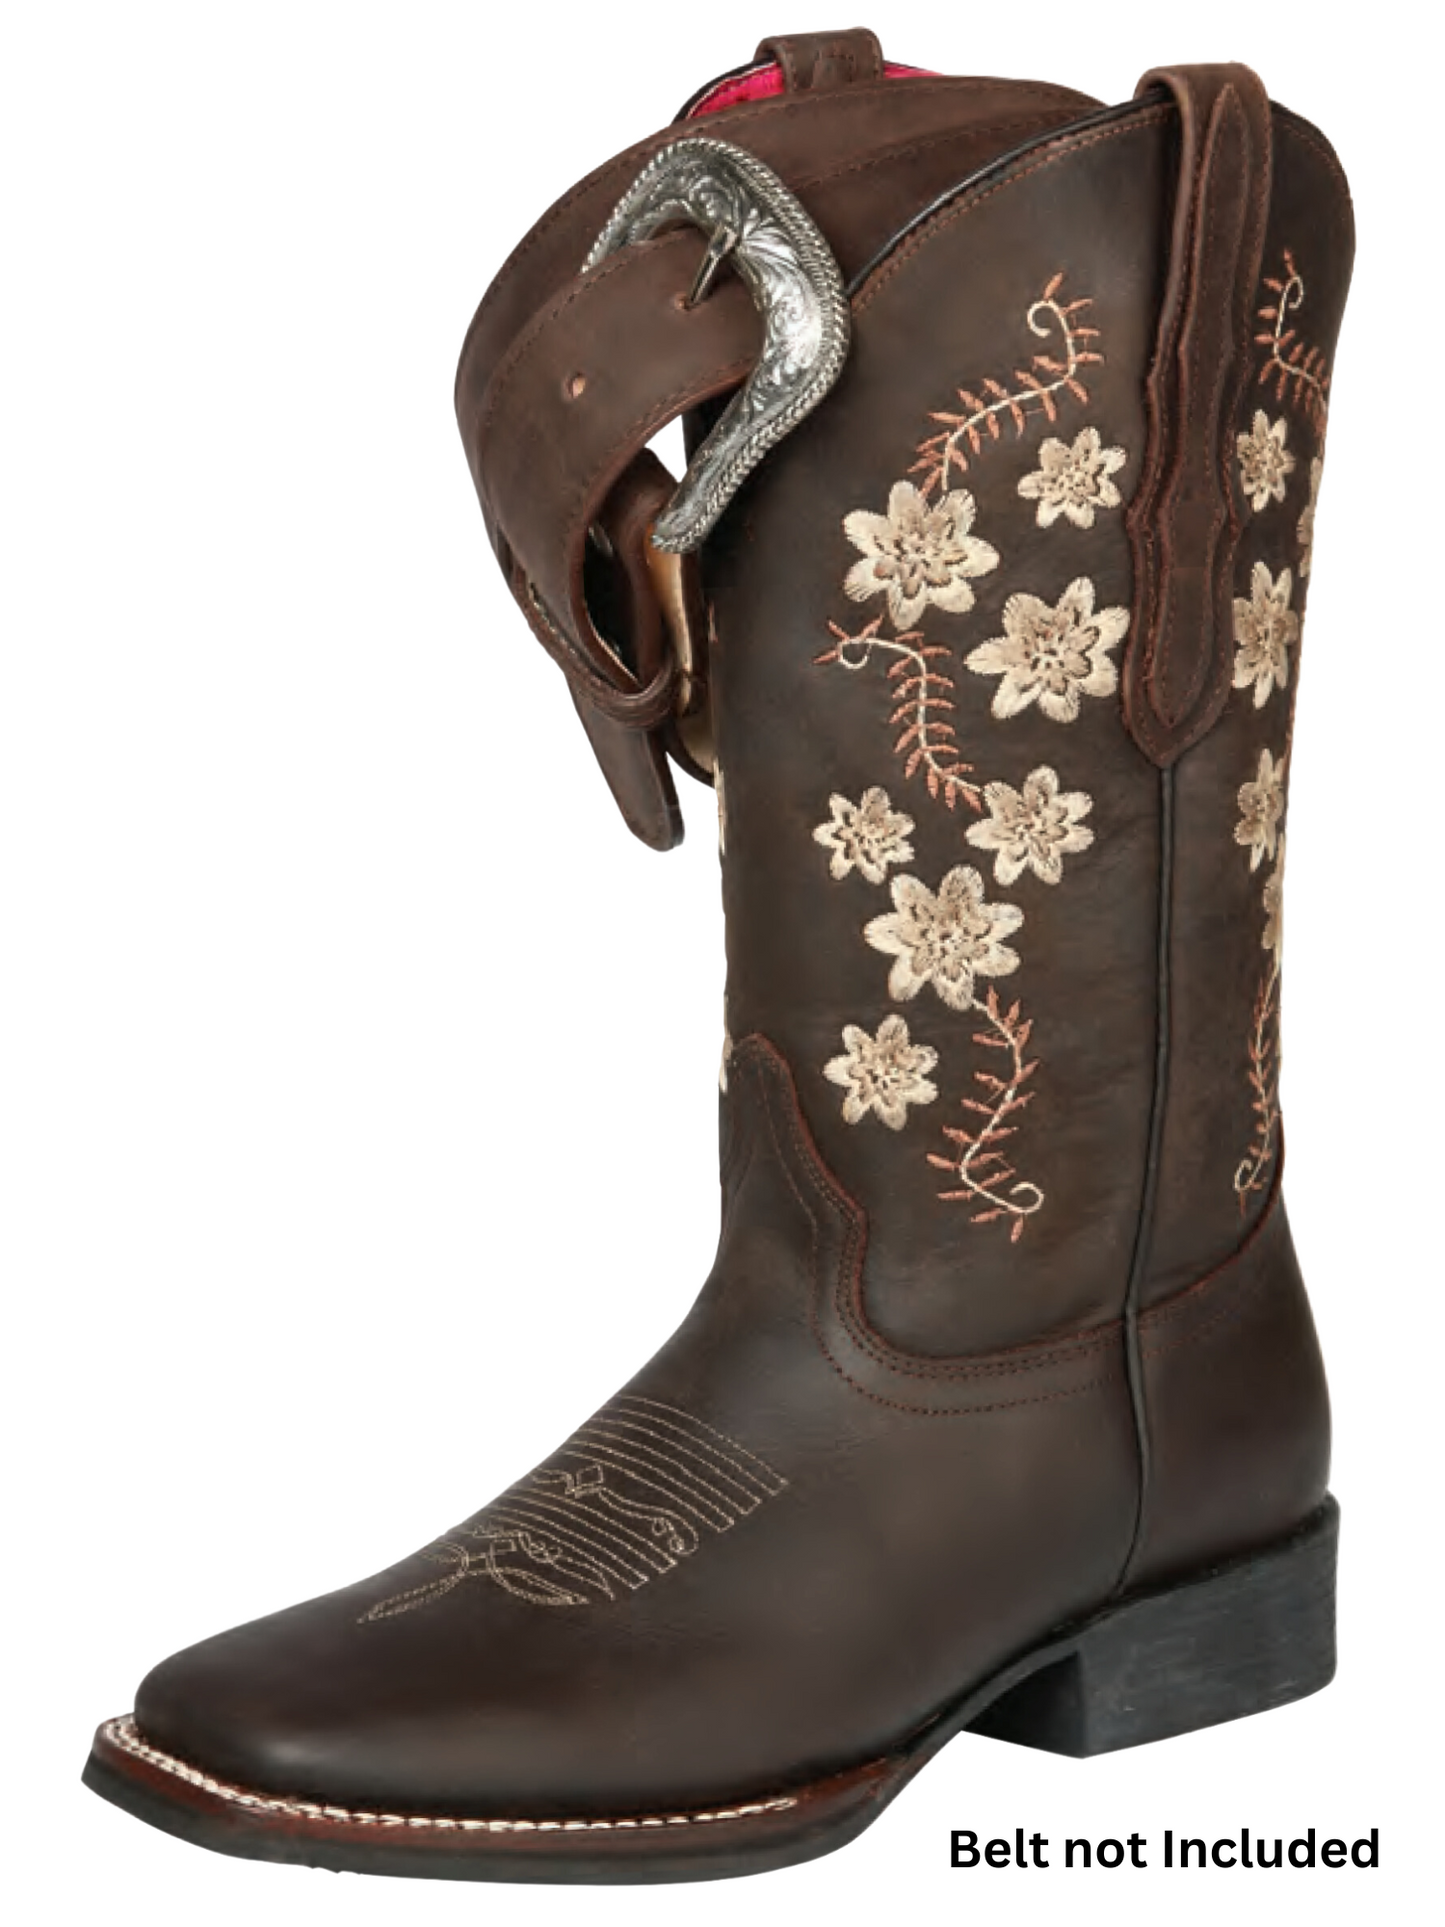 Rodeo Cowboy Boots with Genuine Leather Flower Embroidered Tube for Women 'El General' - ID: 44641 Cowgirl Boots El General